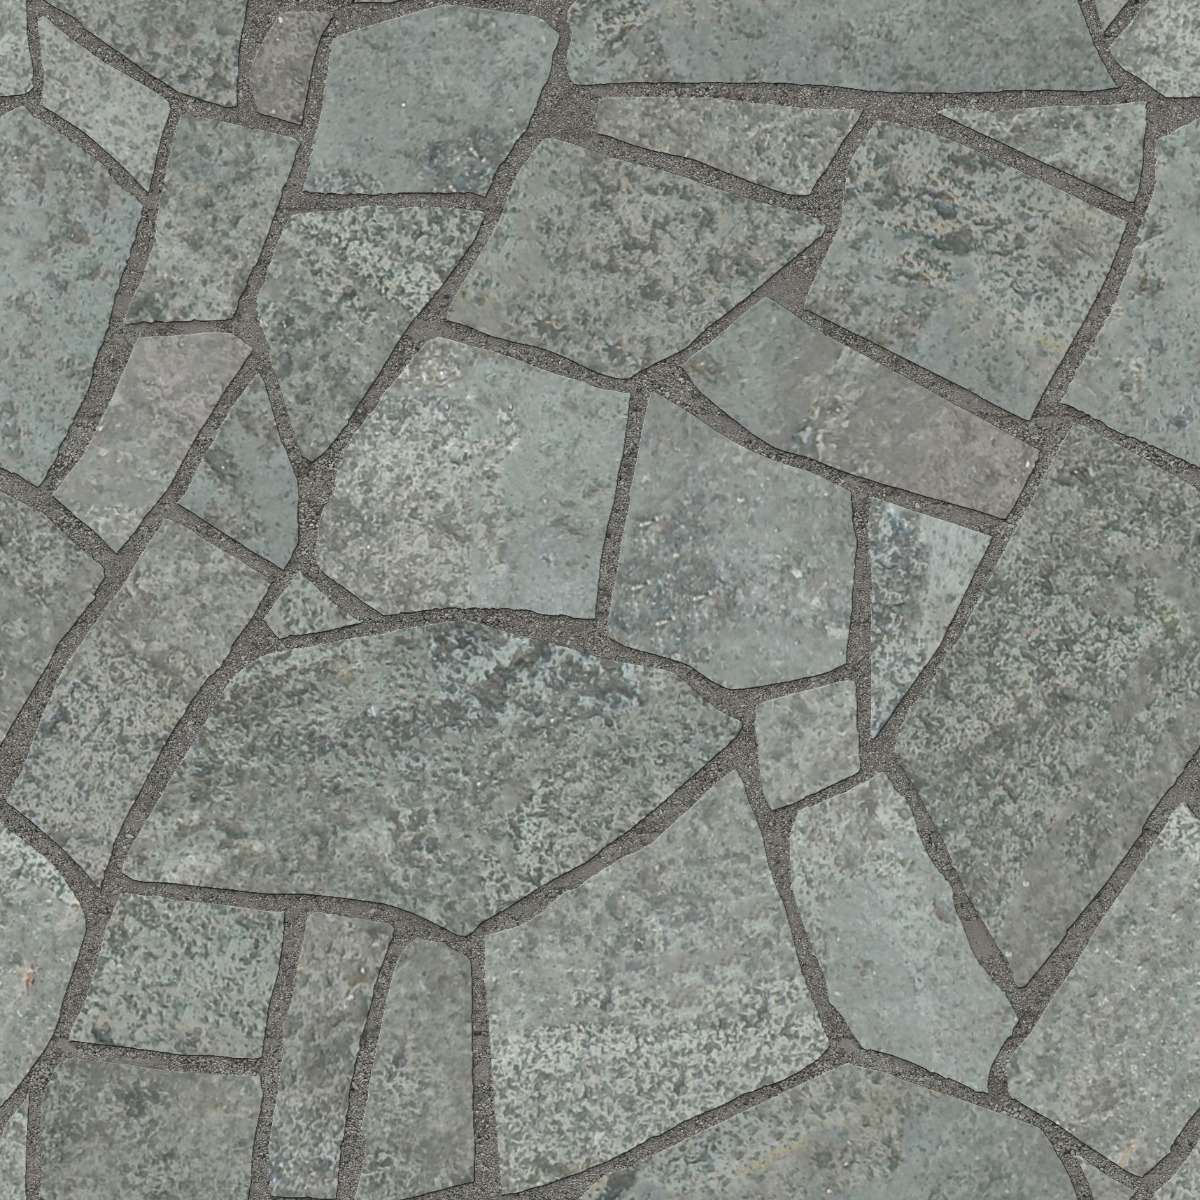 A seamless stone texture with flagstone blocks arranged in a Crazy Paving pattern